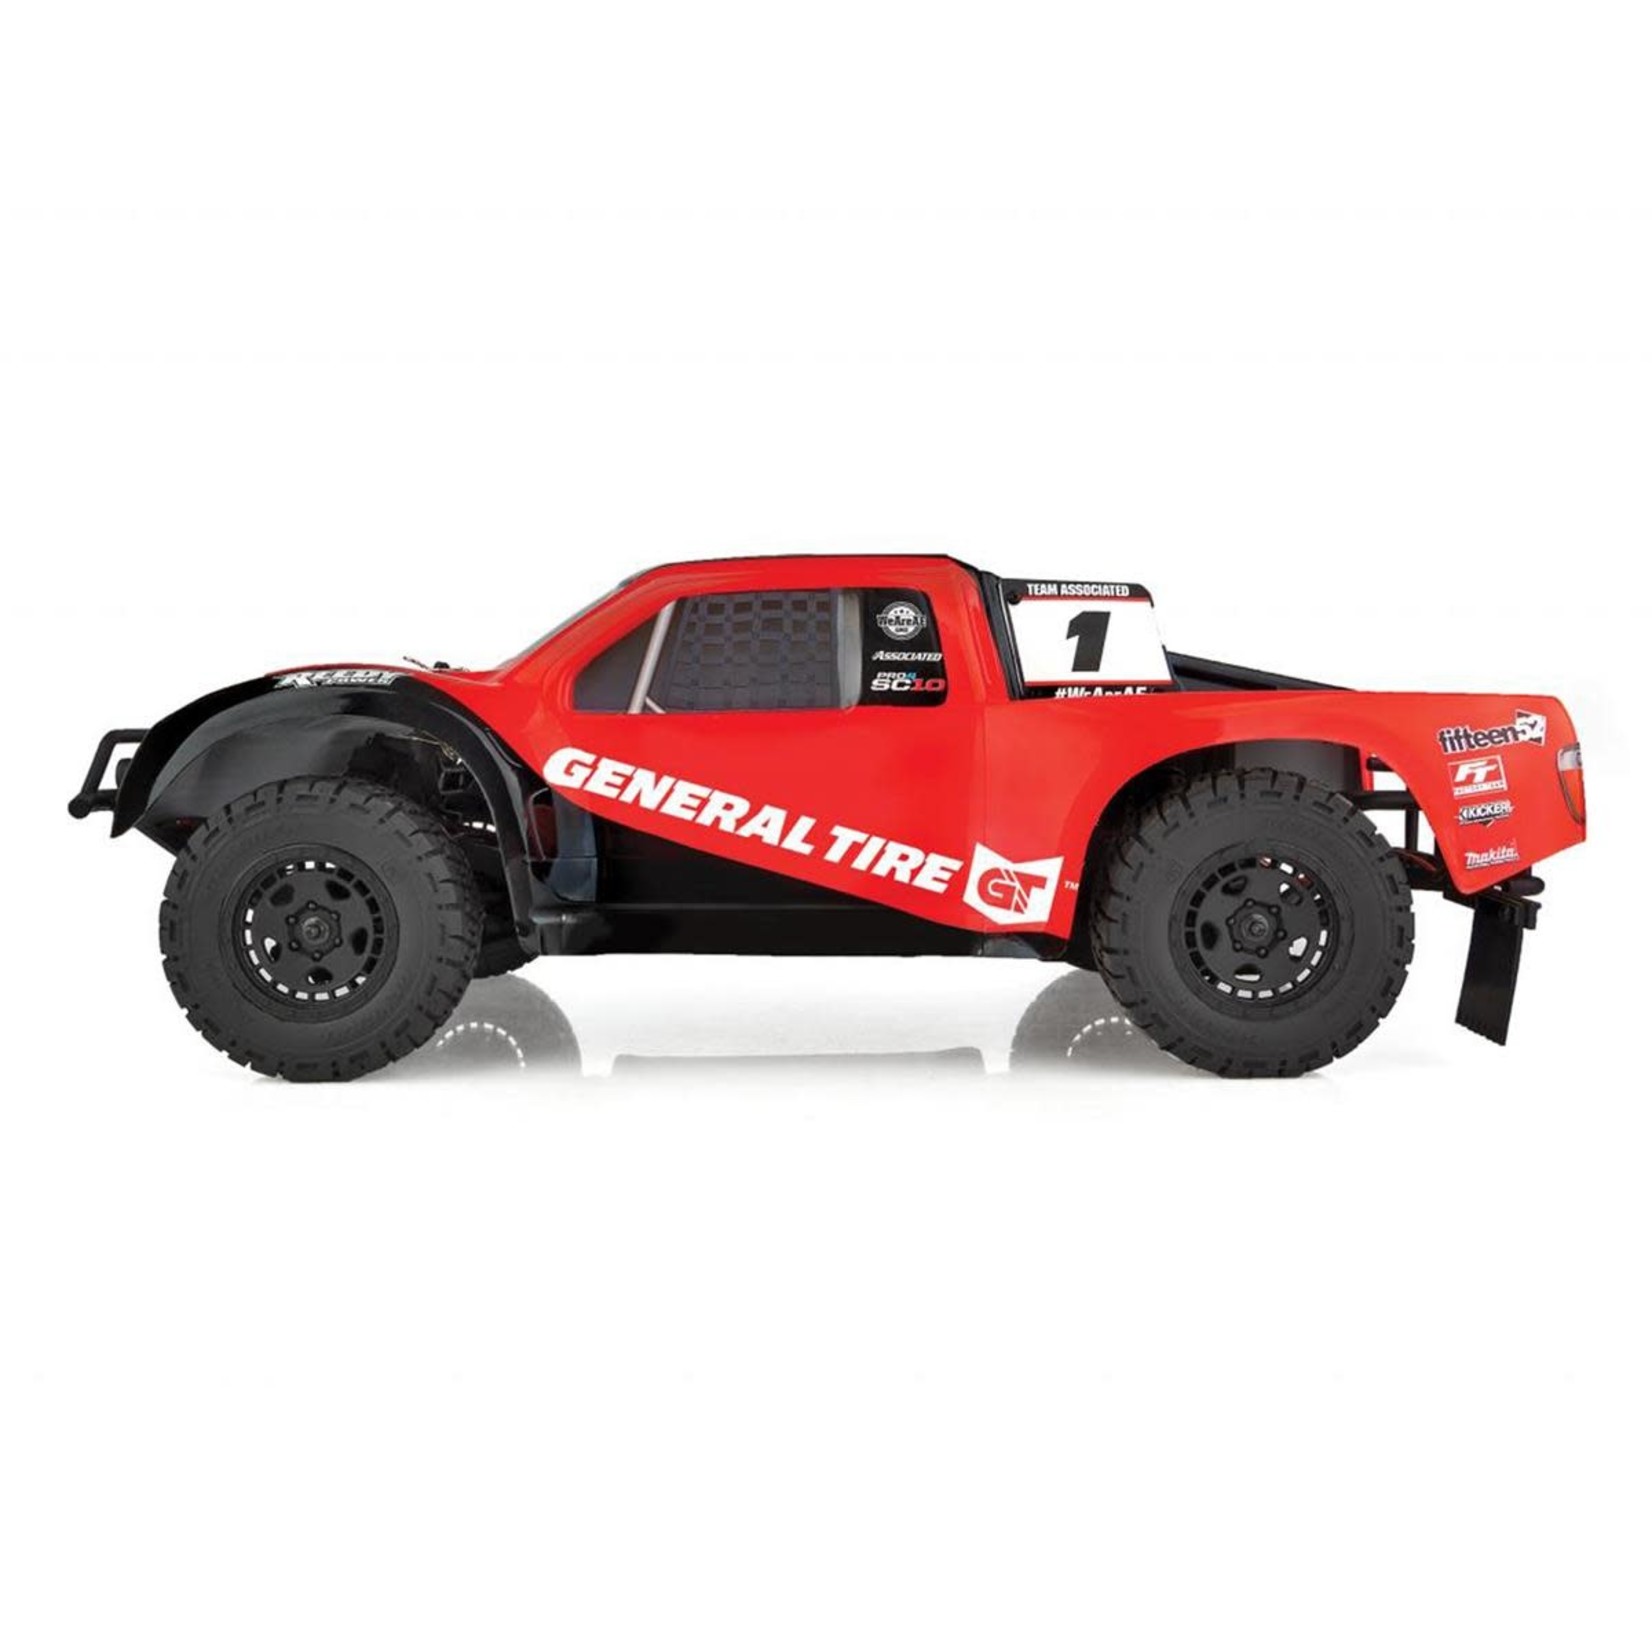 Team Associated Team Associated Pro4 SC10 1/10 RTR 4WD Brushless Short Course Truck w/2.4GHz Radio (General Tire) #20531